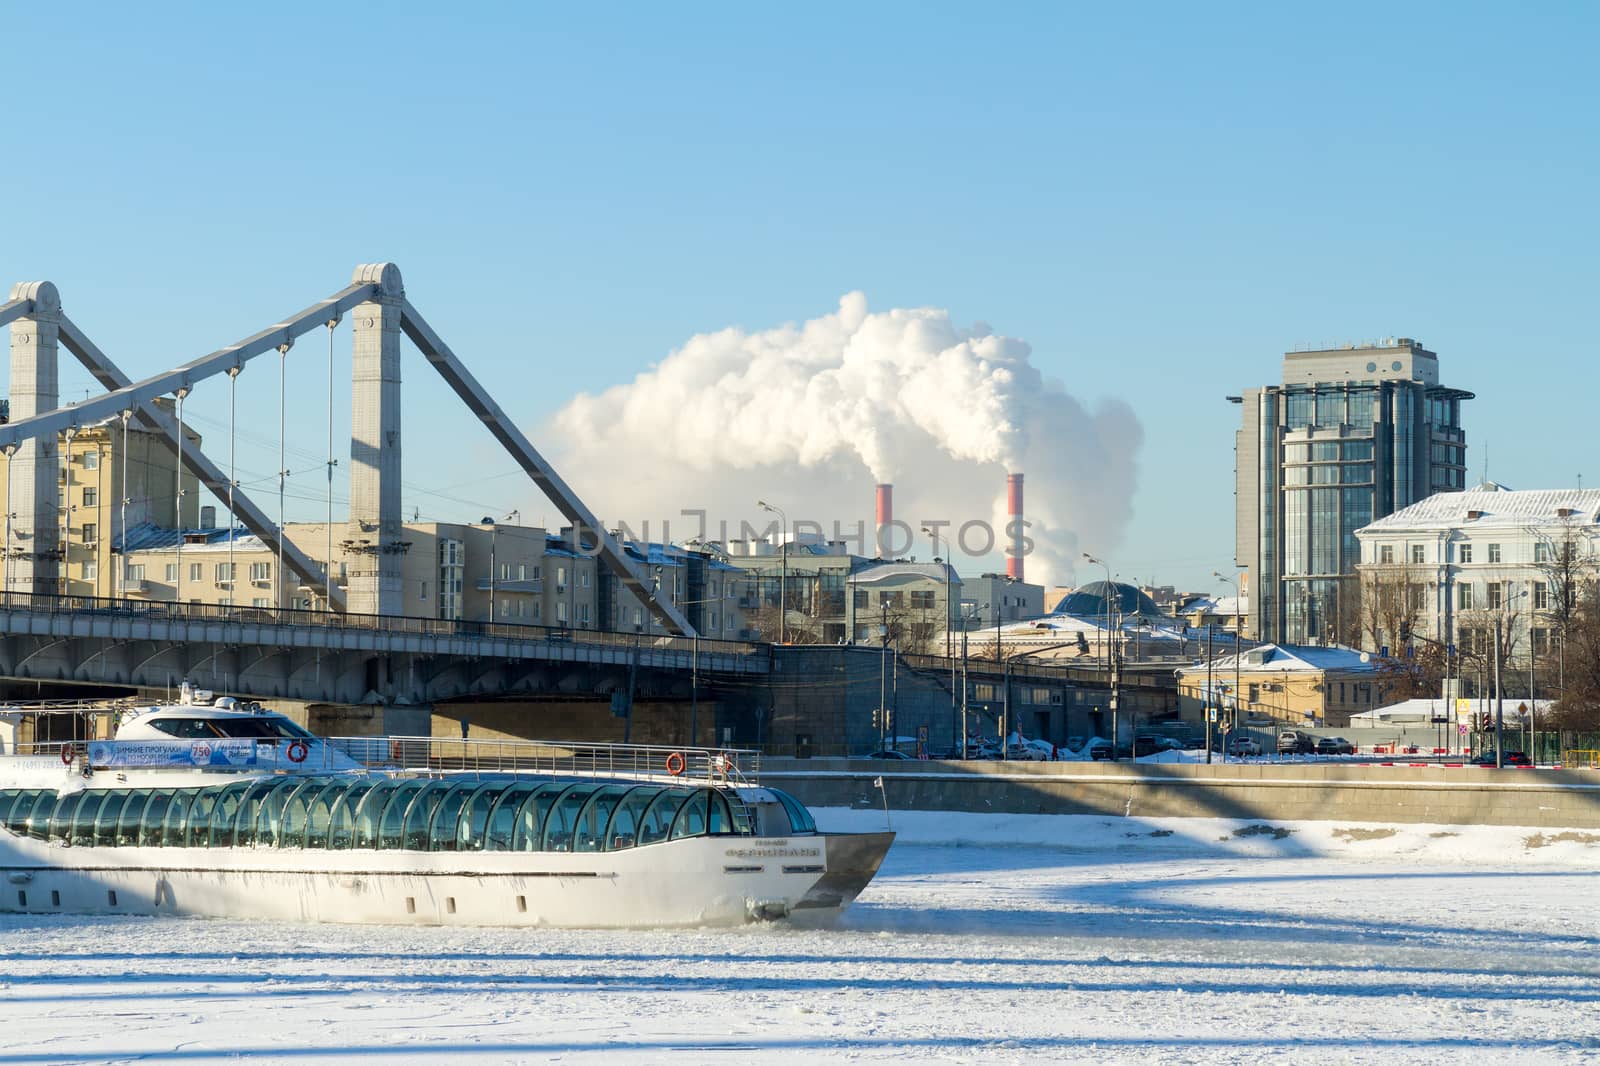 Moscow, Russia - January 8, 2017: Pleasure boat sailing on a frozen river under the bridge metal structures, frosty sunny winter day on the background of residential and office buildings and power plant pipes, spewing steam - in Moscow, Russia